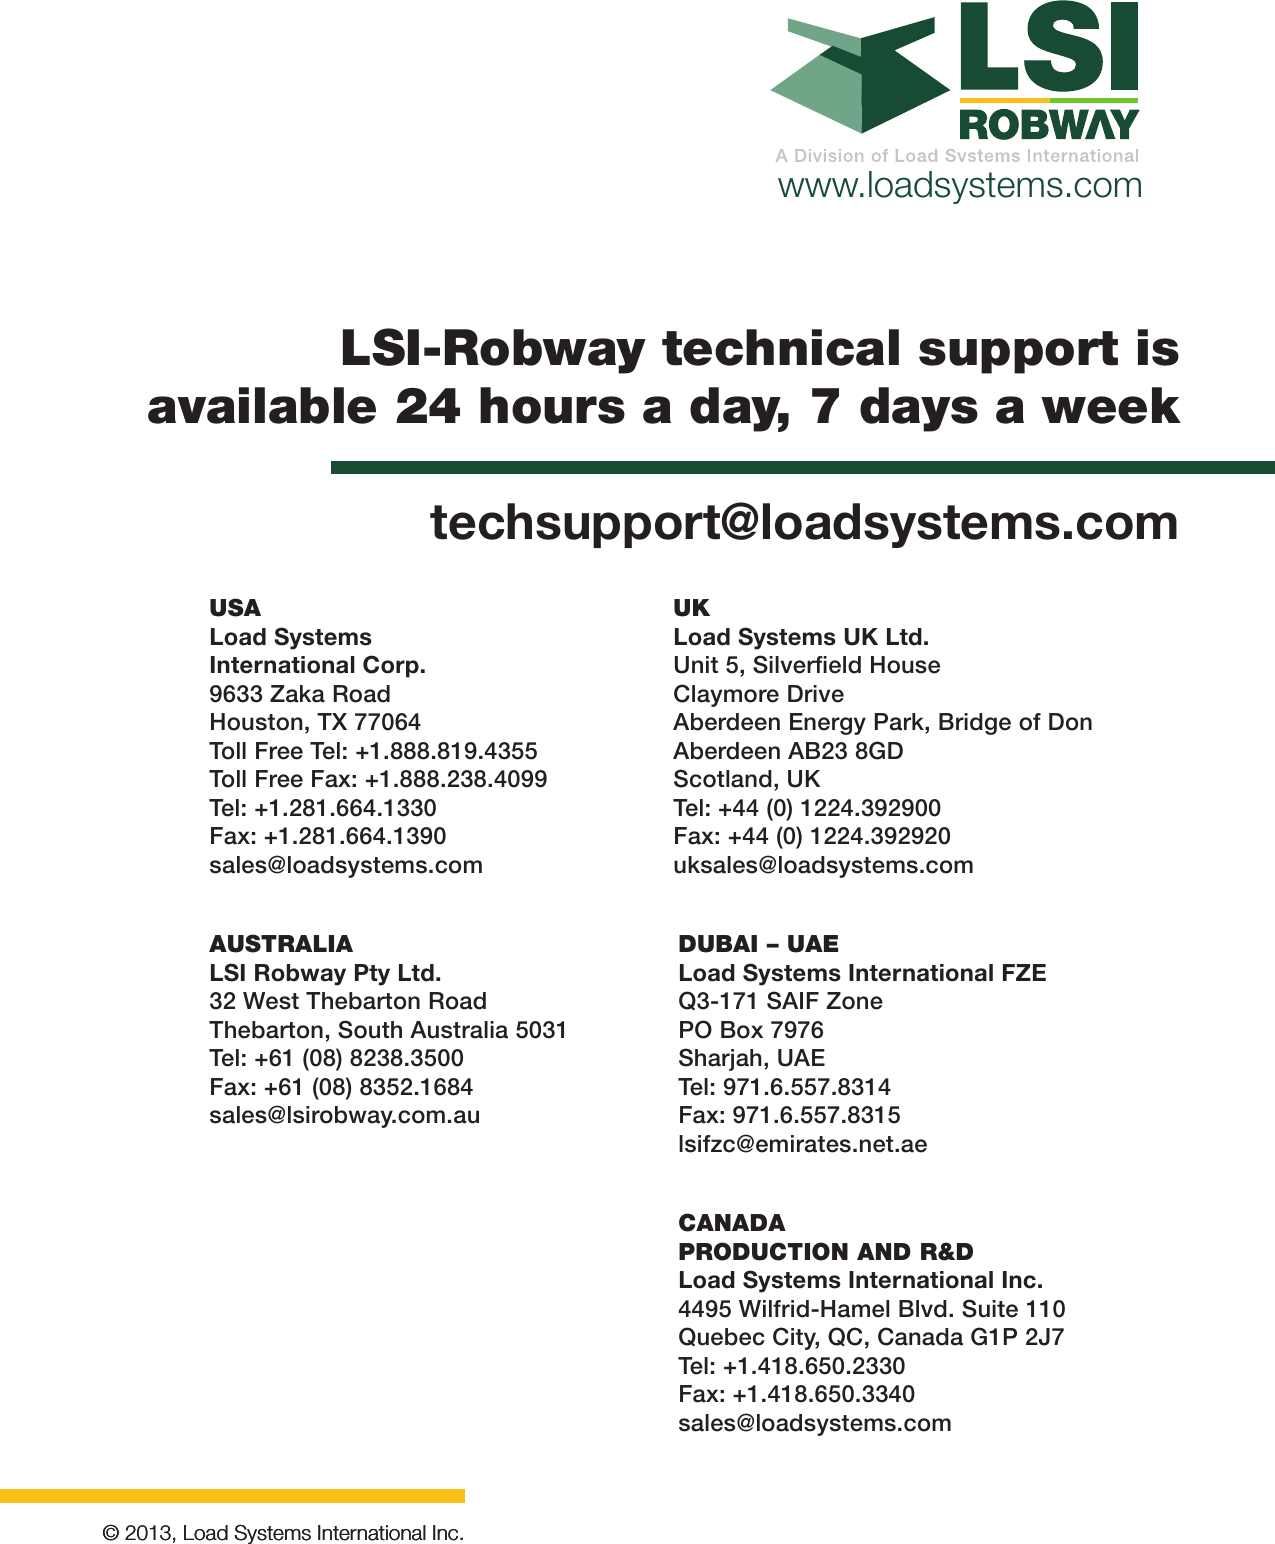 www.loadsystems.com© 2013, Load Systems International Inc.© 2013, Load Systems International Inc.LSI-Robway technical support is available 24 hours a day, 7 days a weektechsupport@loadsystems.comCANADAPRODUCTION AND R&amp;DLoad Systems International Inc.4495 Wilfrid-Hamel Blvd. Suite 110Quebec City, QC, Canada G1P 2J7Tel: +1.418.650.2330Fax: +1.418.650.3340sales@loadsystems.comAUSTRALIALSI Robway Pty Ltd.32 West Thebarton RoadThebarton, South Australia 5031Tel: +61 (08) 8238.3500Fax: +61 (08) 8352.1684sales@lsirobway.com.auDUBAI – UAELoad Systems International FZEQ3-171 SAIF ZonePO Box 7976Sharjah, UAETel: 971.6.557.8314Fax: 971.6.557.8315lsifzc@emirates.net.aeUKLoad Systems UK Ltd.Unit 5, Silverﬁeld HouseClaymore DriveAberdeen Energy Park, Bridge of DonAberdeen AB23 8GDScotland, UKTel: +44 (0) 1224.392900Fax: +44 (0) 1224.392920uksales@loadsystems.comUSALoad Systems International Corp.9633 Zaka RoadHouston, TX 77064Toll Free Tel: +1.888.819.4355Toll Free Fax: +1.888.238.4099Tel: +1.281.664.1330Fax: +1.281.664.1390sales@loadsystems.com